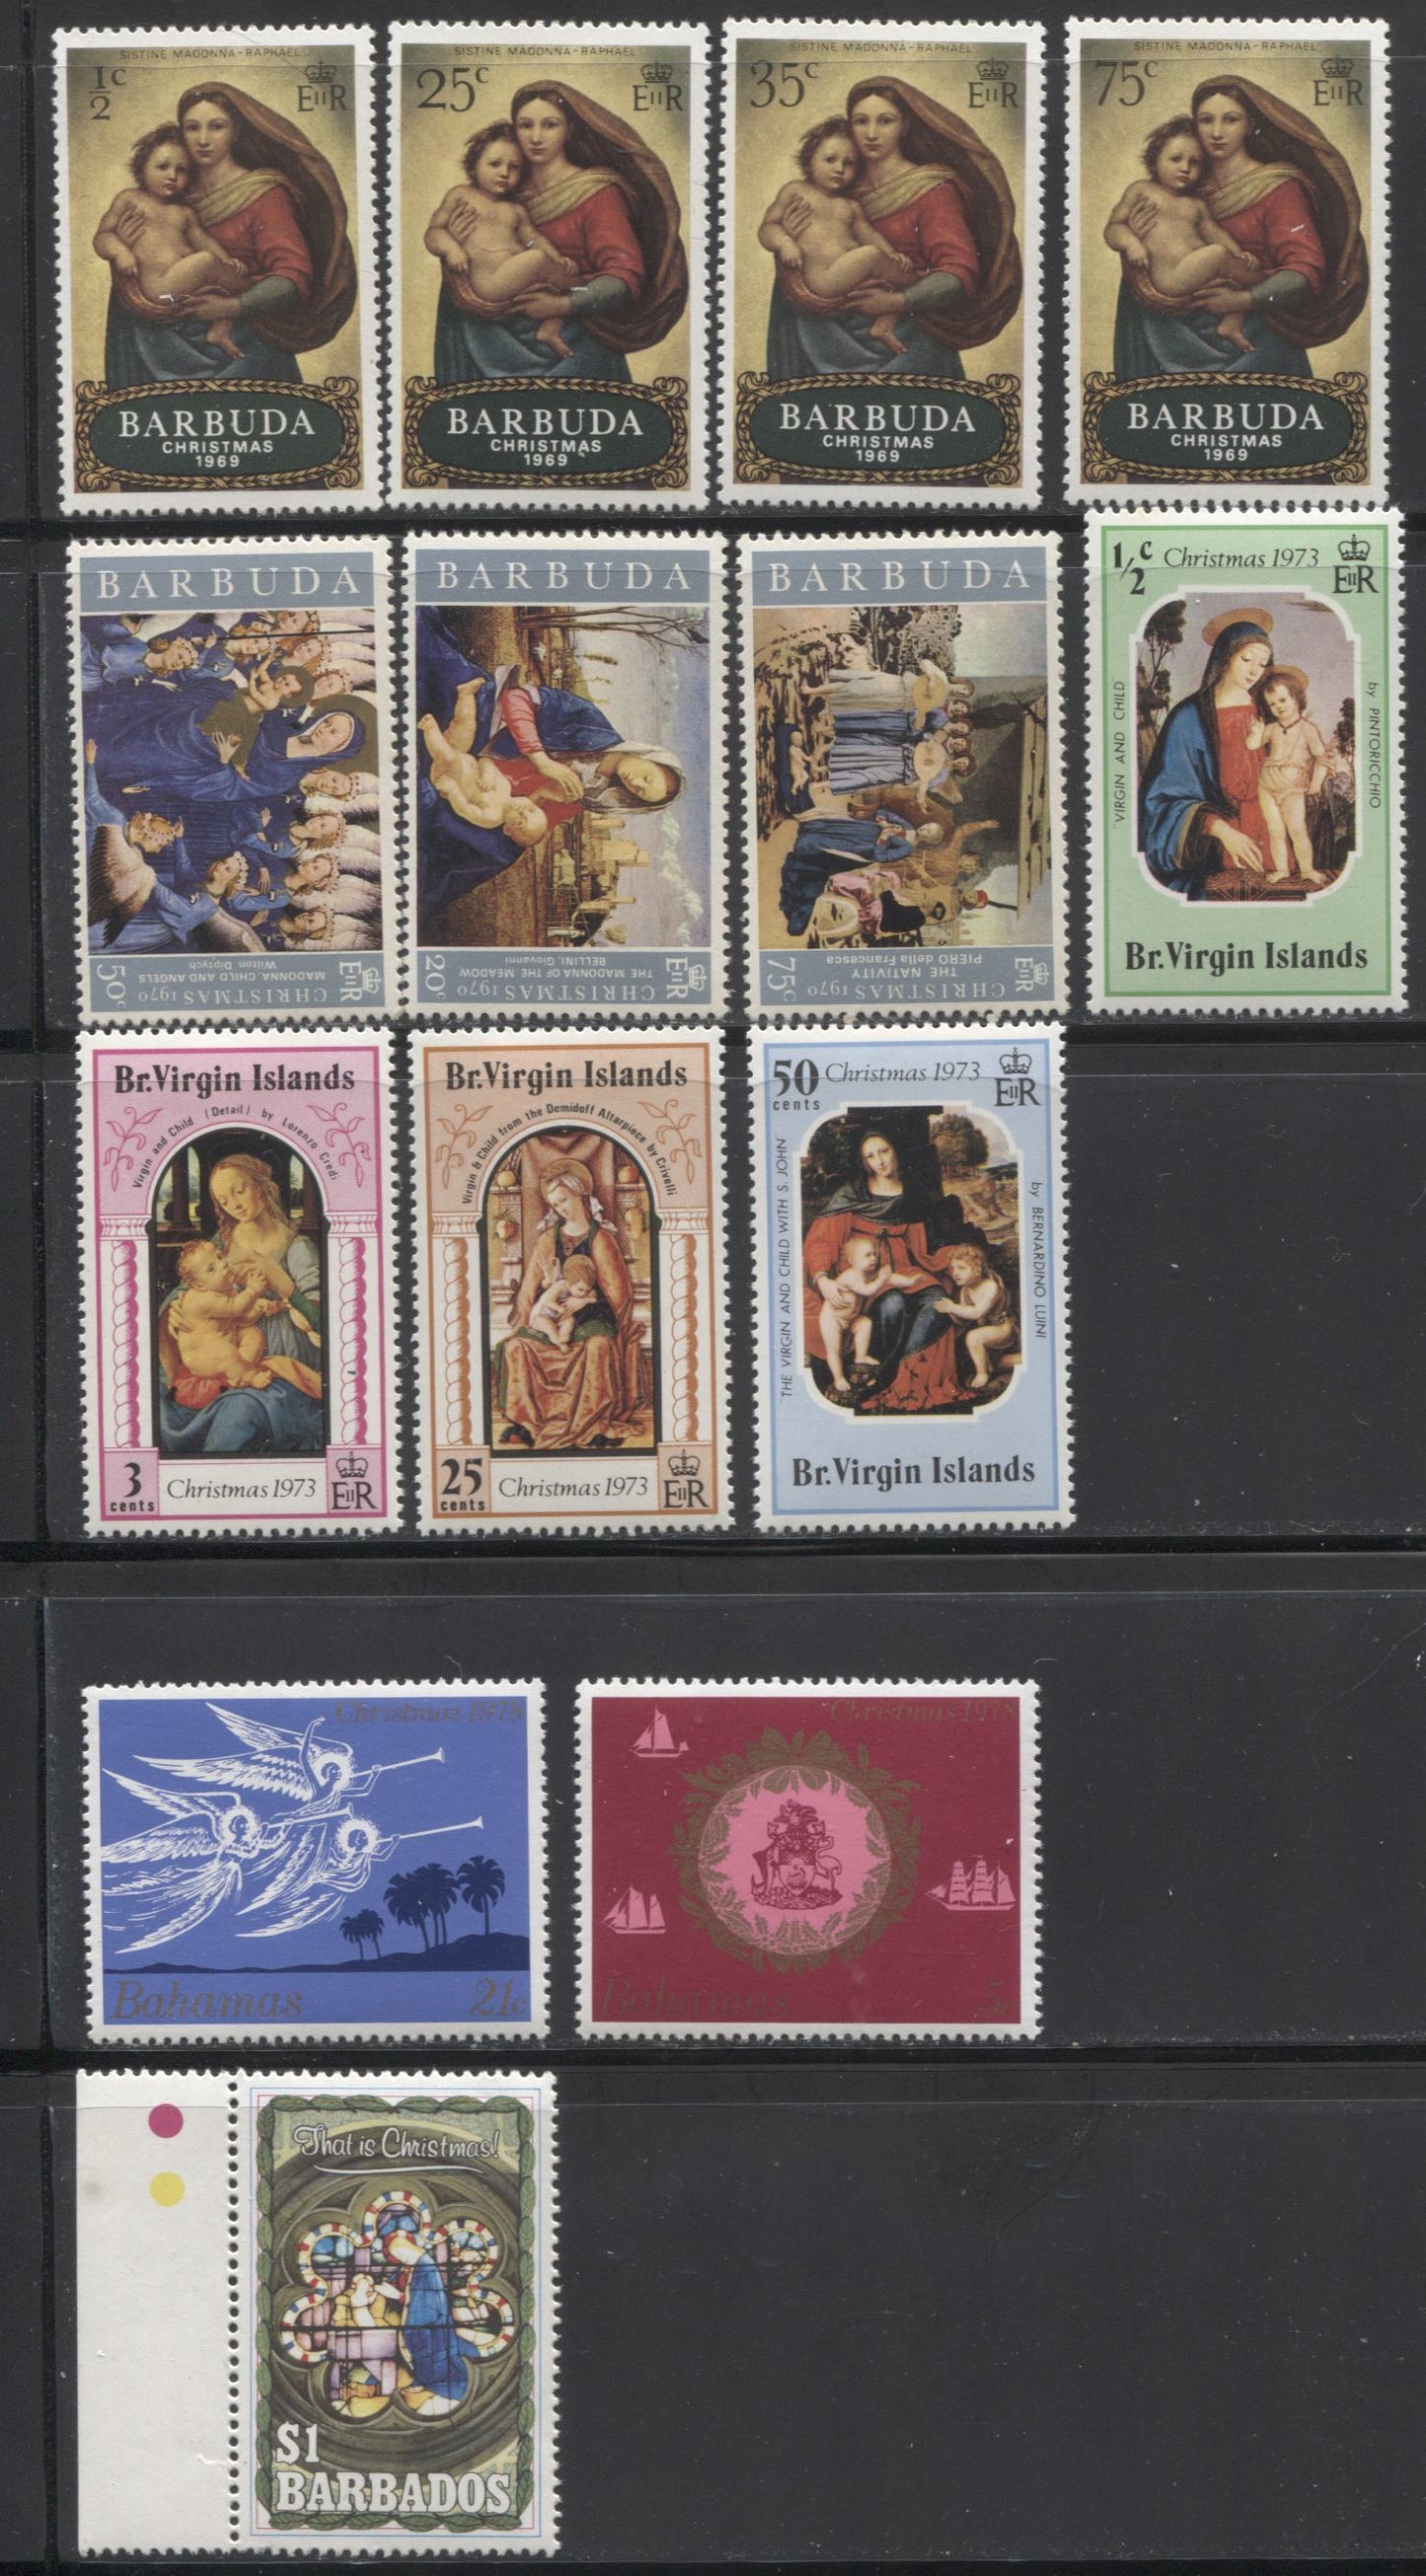 Lot 247 Bahamas - British Virgin Islands 1960's to 1970's Christmas Issues, A Small Selection of 5 VFNH Sets